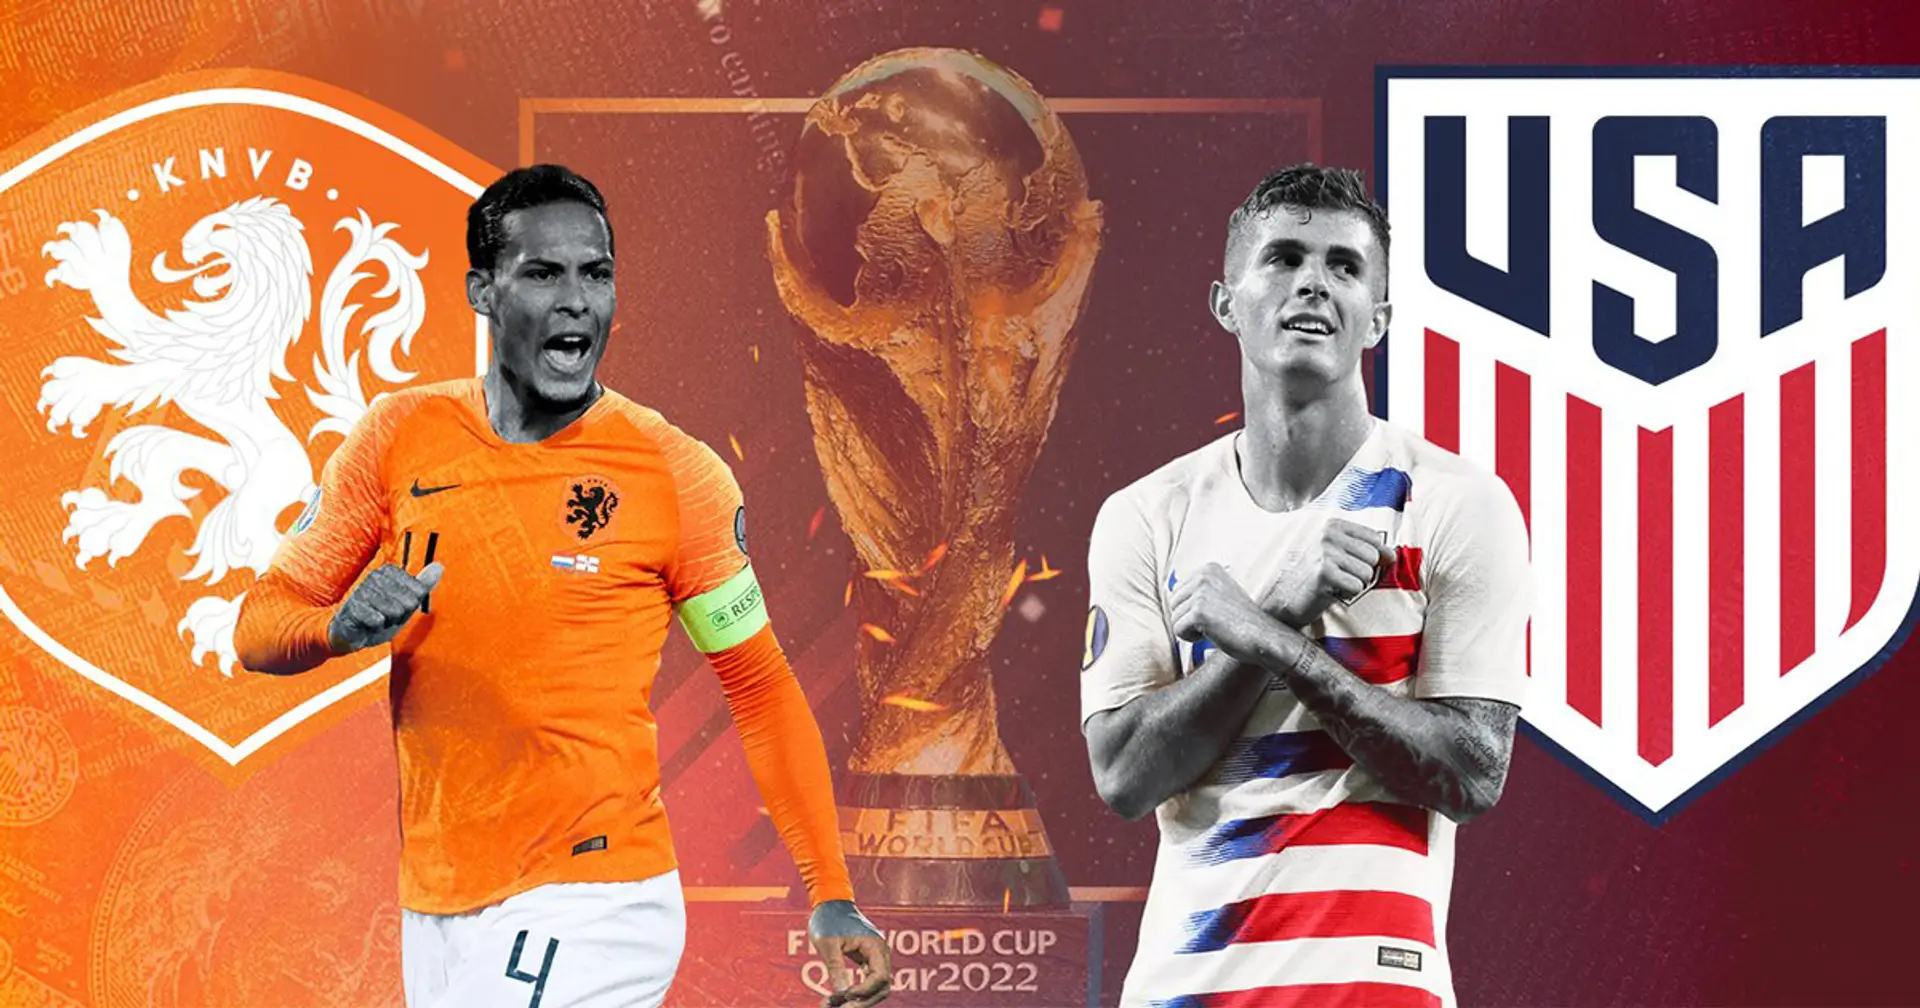 The Netherlands v USA: Official team lineups for the World Cup clash revealed